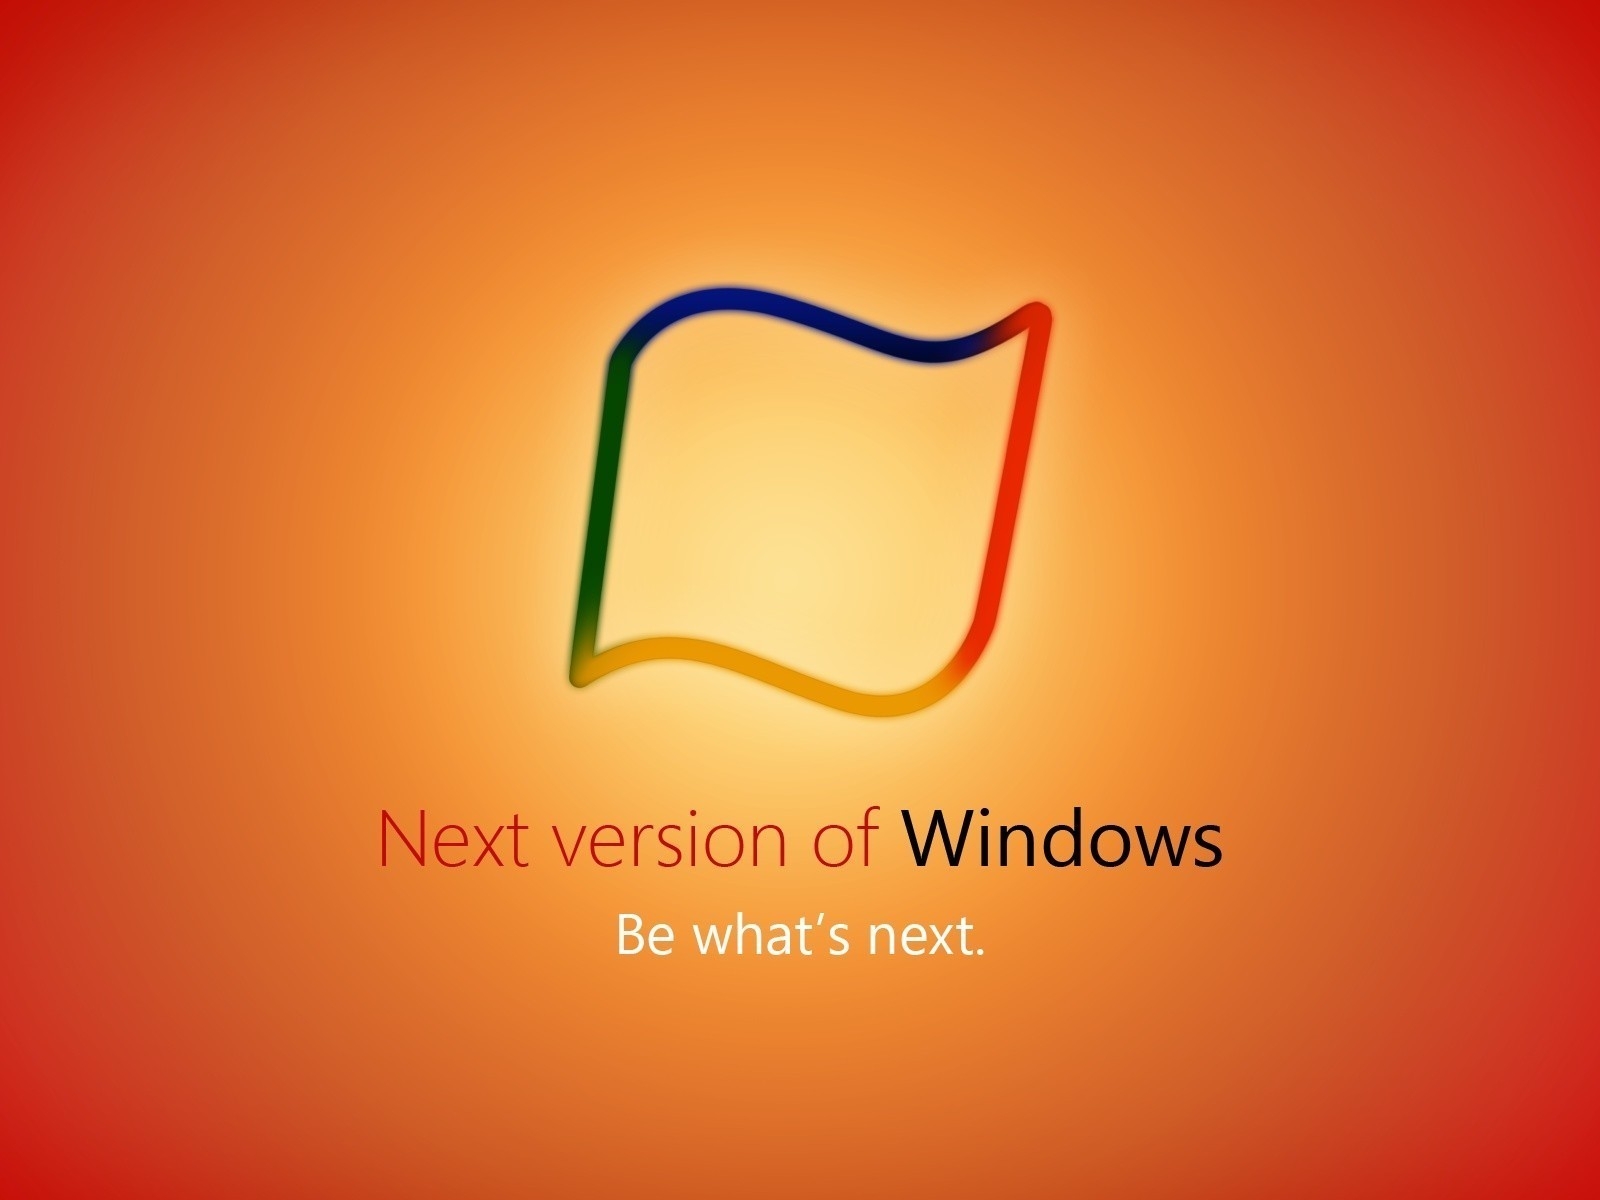 Next Version of Windows for 1600 x 1200 resolution